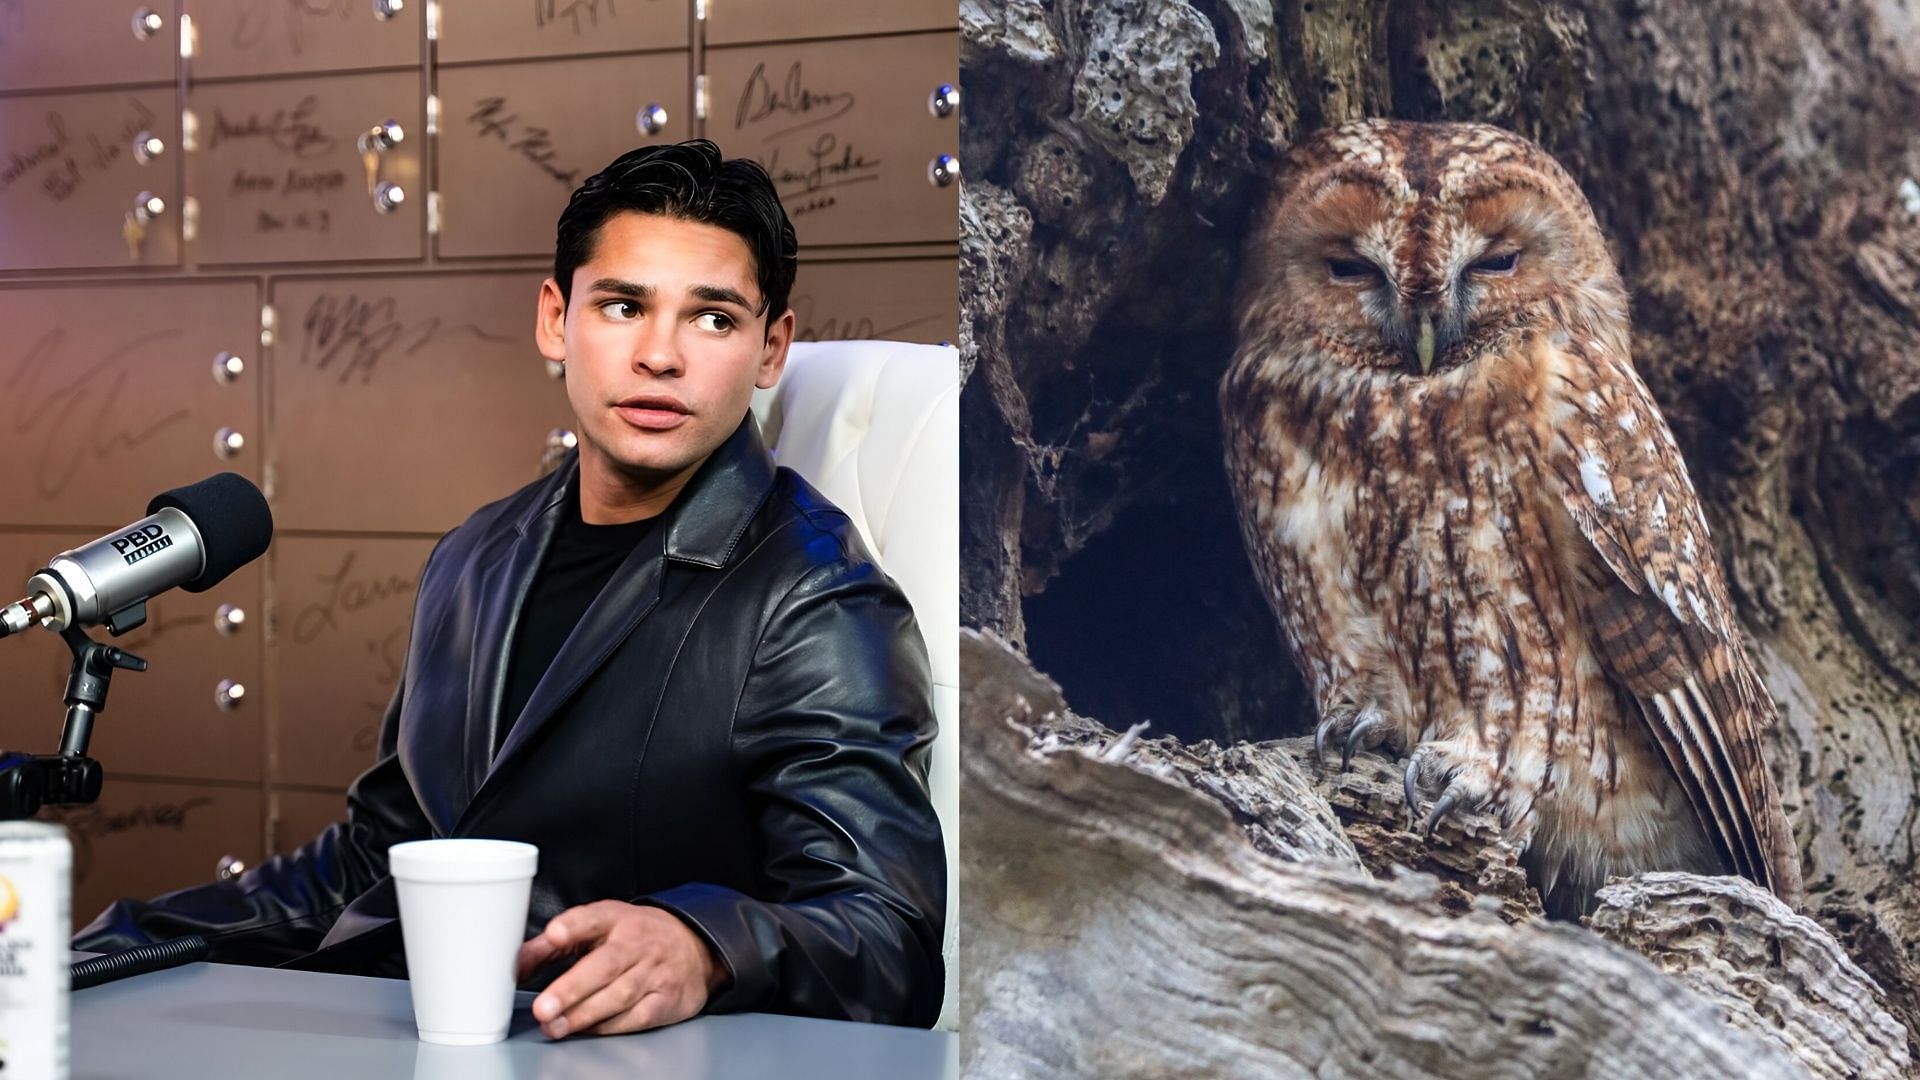 Meaning of the owl statue and Moloch explored as Ryan Garcia